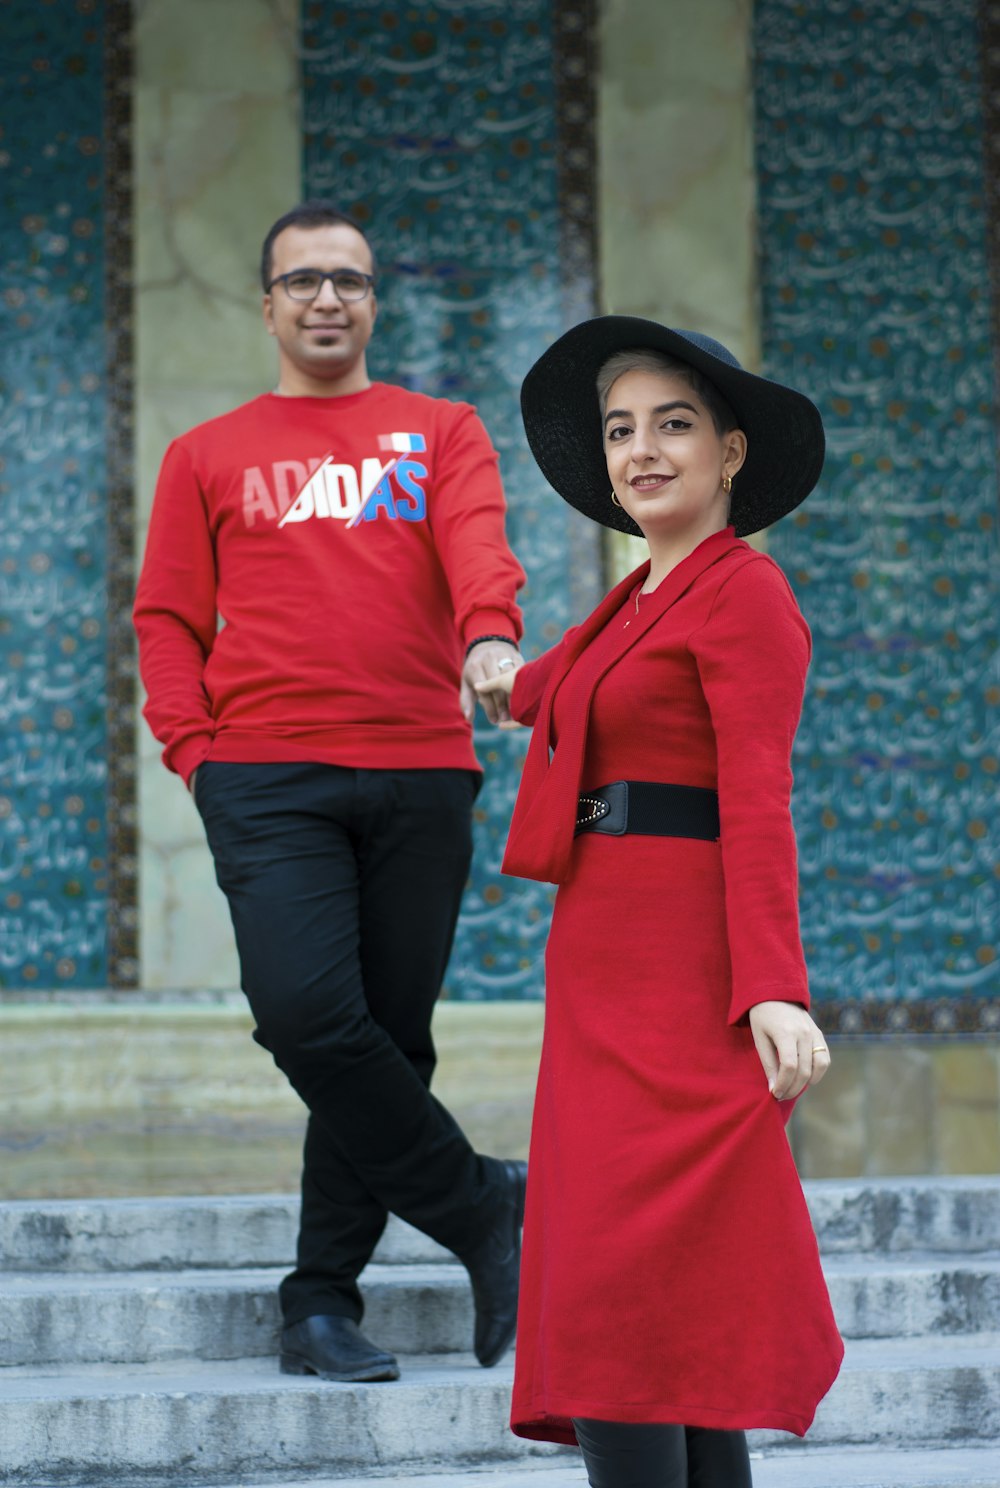 man in red long sleeve shirt and black pants standing beside woman in black hat